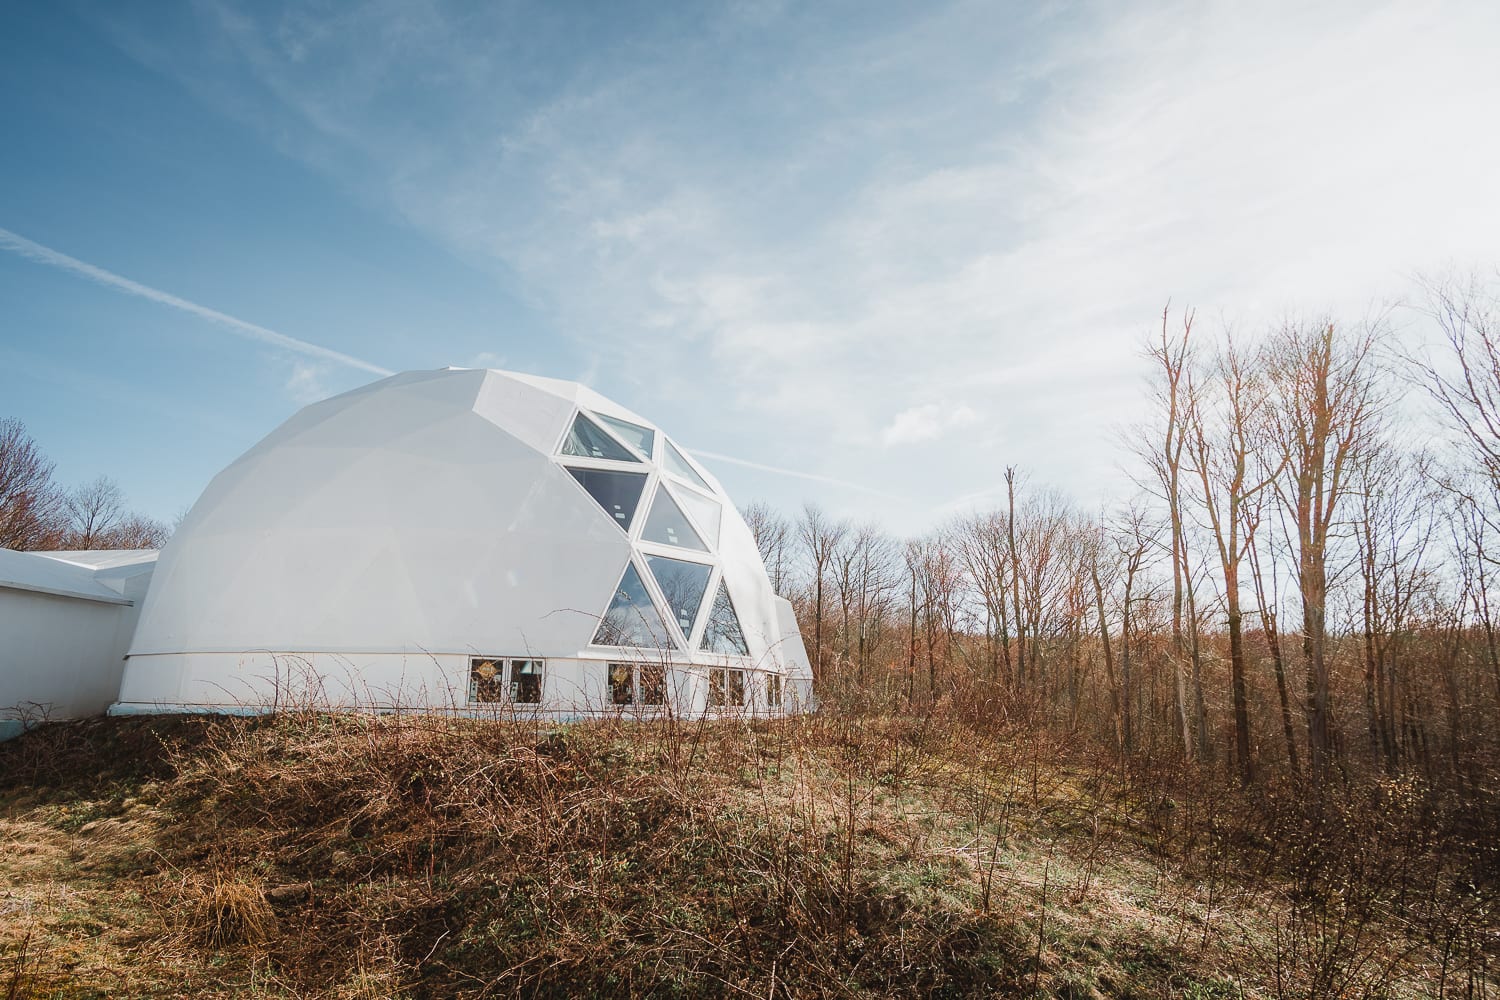 This geodesic dome with a passive solar design serves as the future home of a kitchen and bathroom. It's the community gathering space.